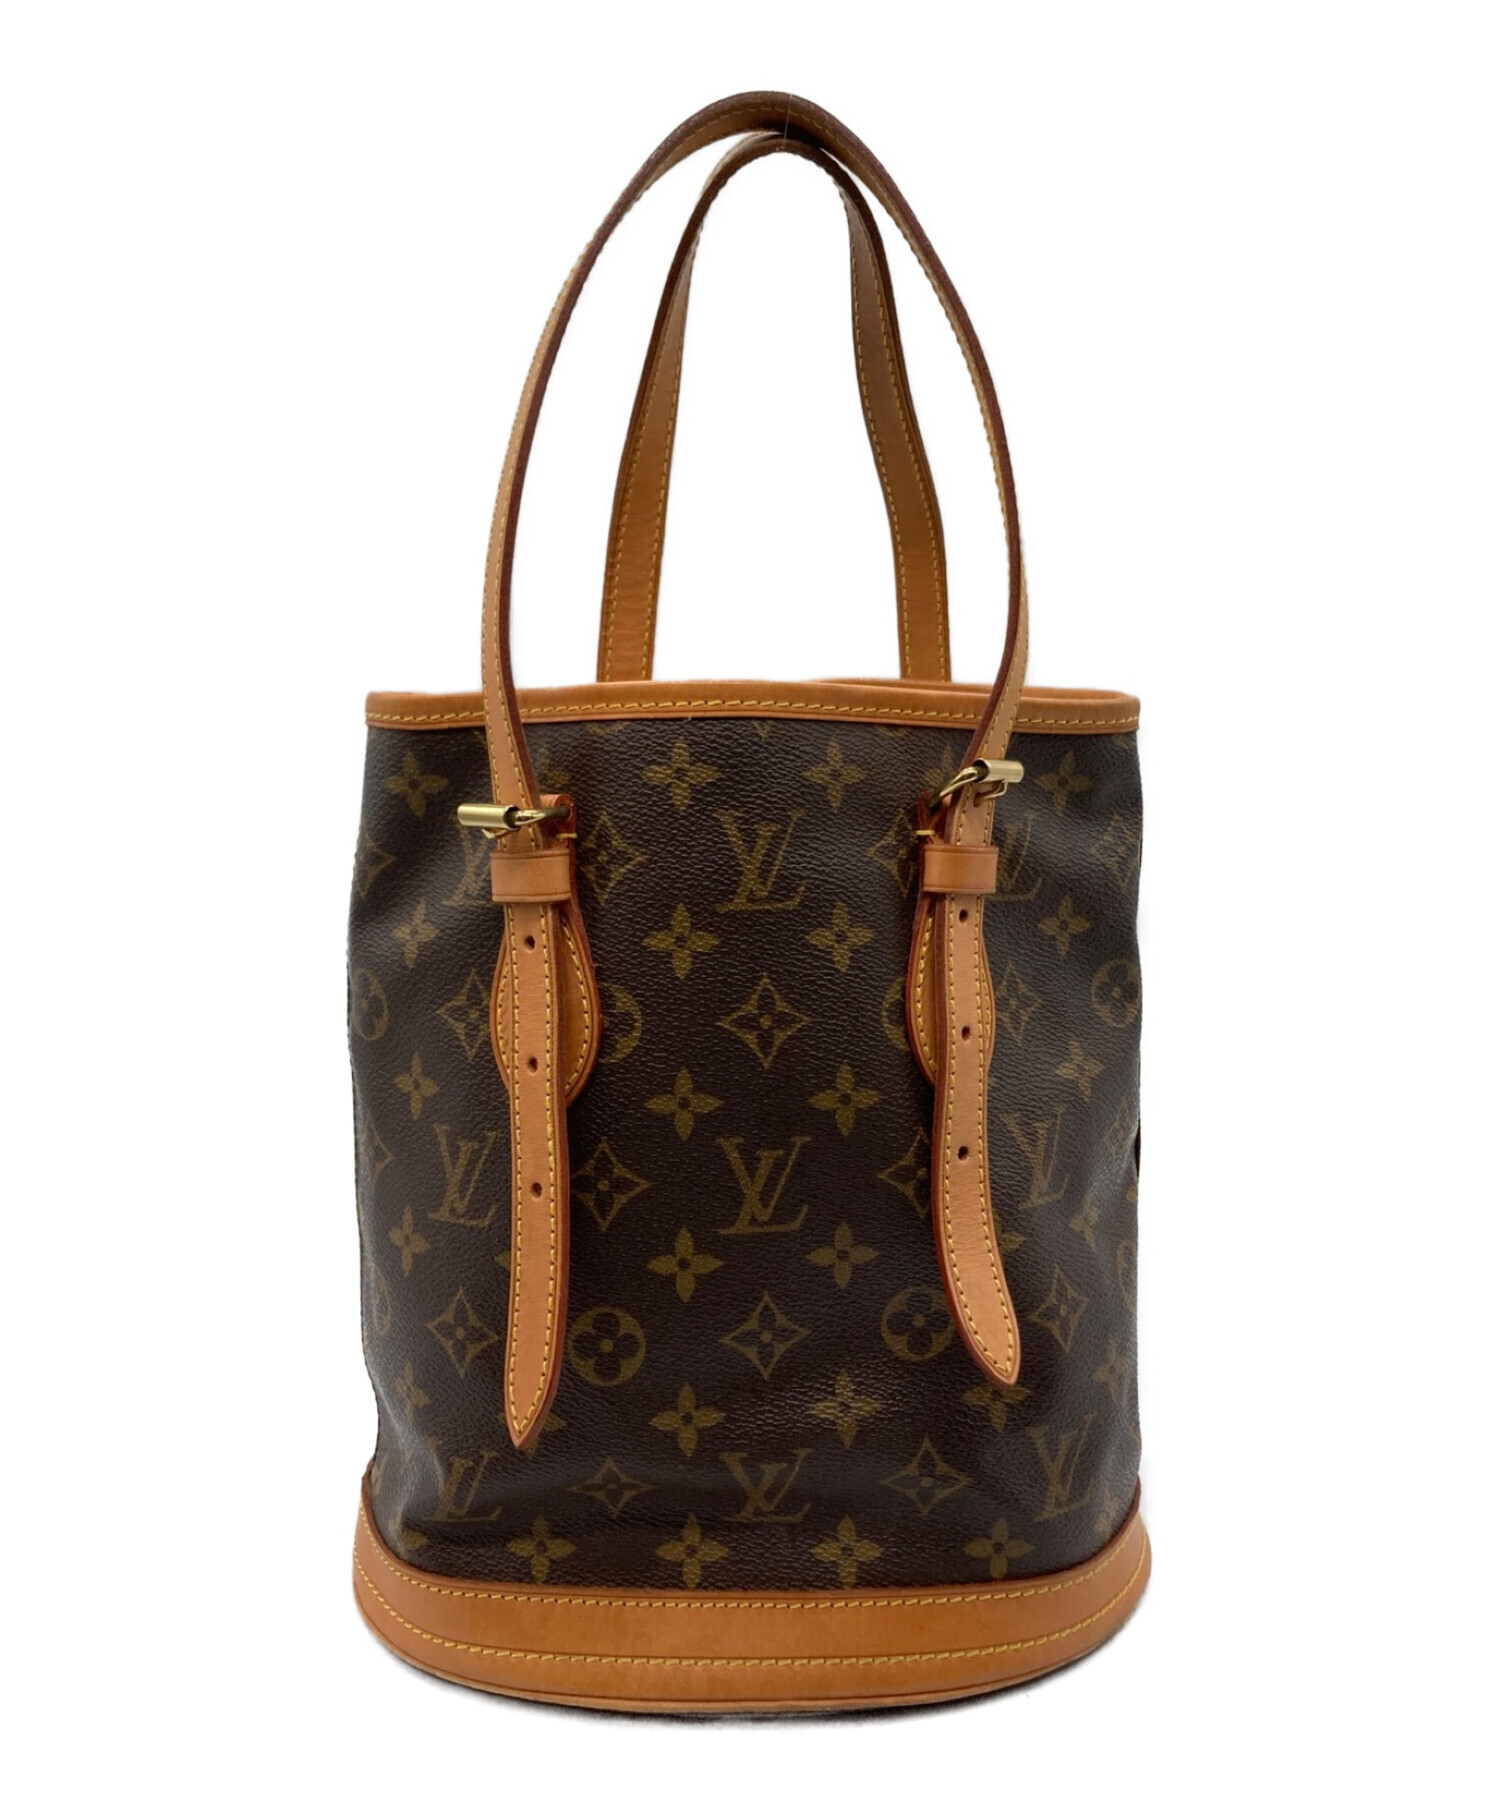 LOUISLOUIS VUITTON ルイヴィトン  バッグ  プチバケット